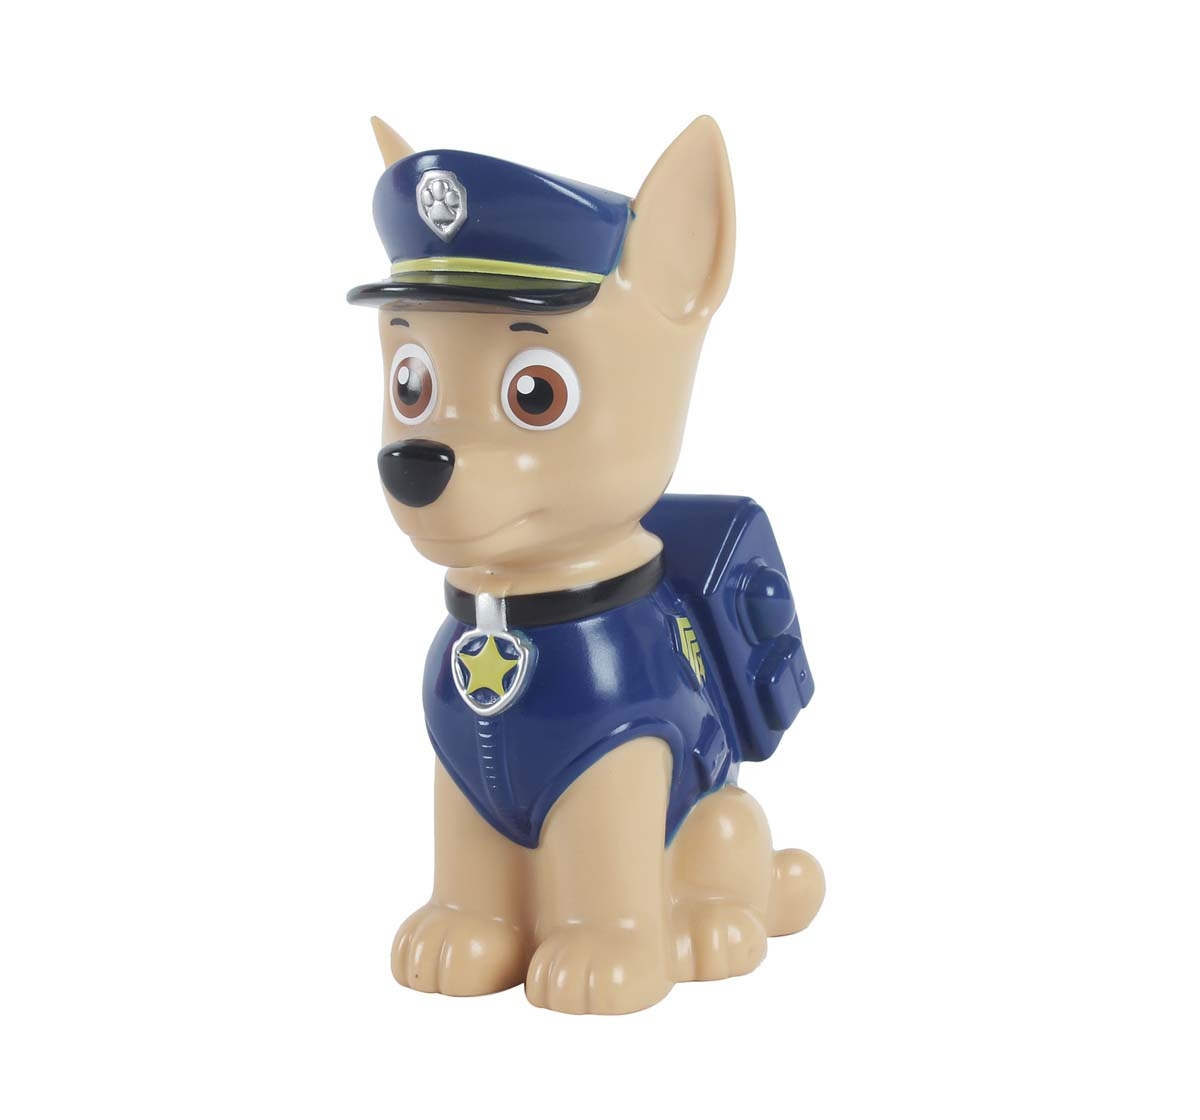 Paw Patrol | Paw Patrol Coin Bank – Chase Novelty for Kids Age 3Y+